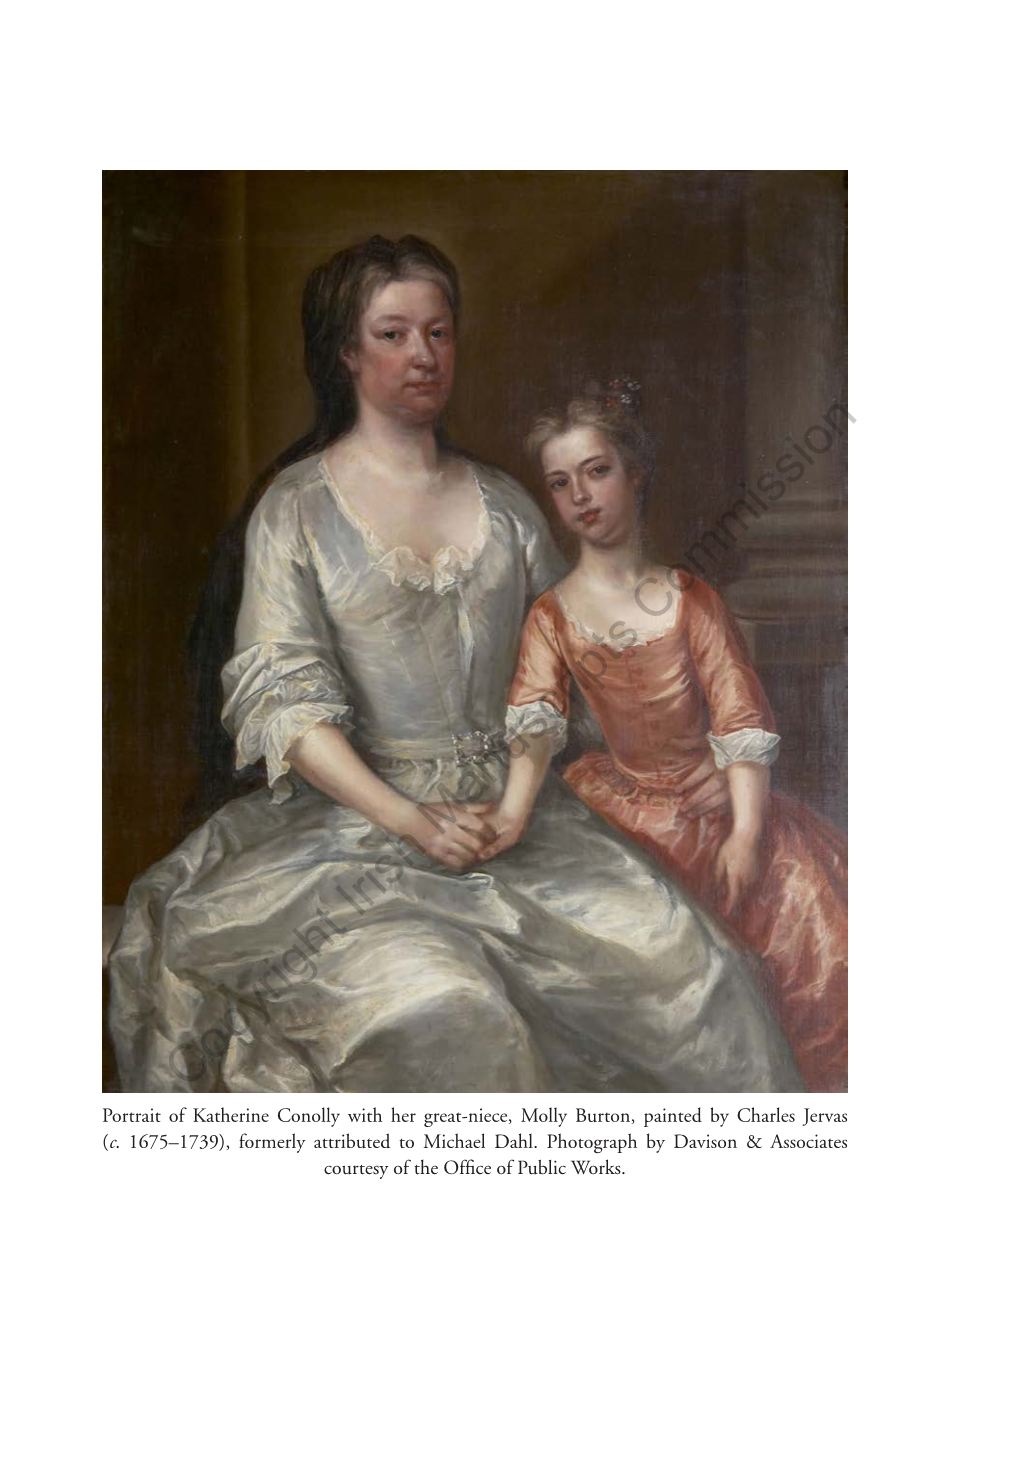 Copyright Irish Manuscripts Commission Portrait of Katherine Conolly with Her Great-Niece, Molly Burton, Painted by Charles Jervas (C